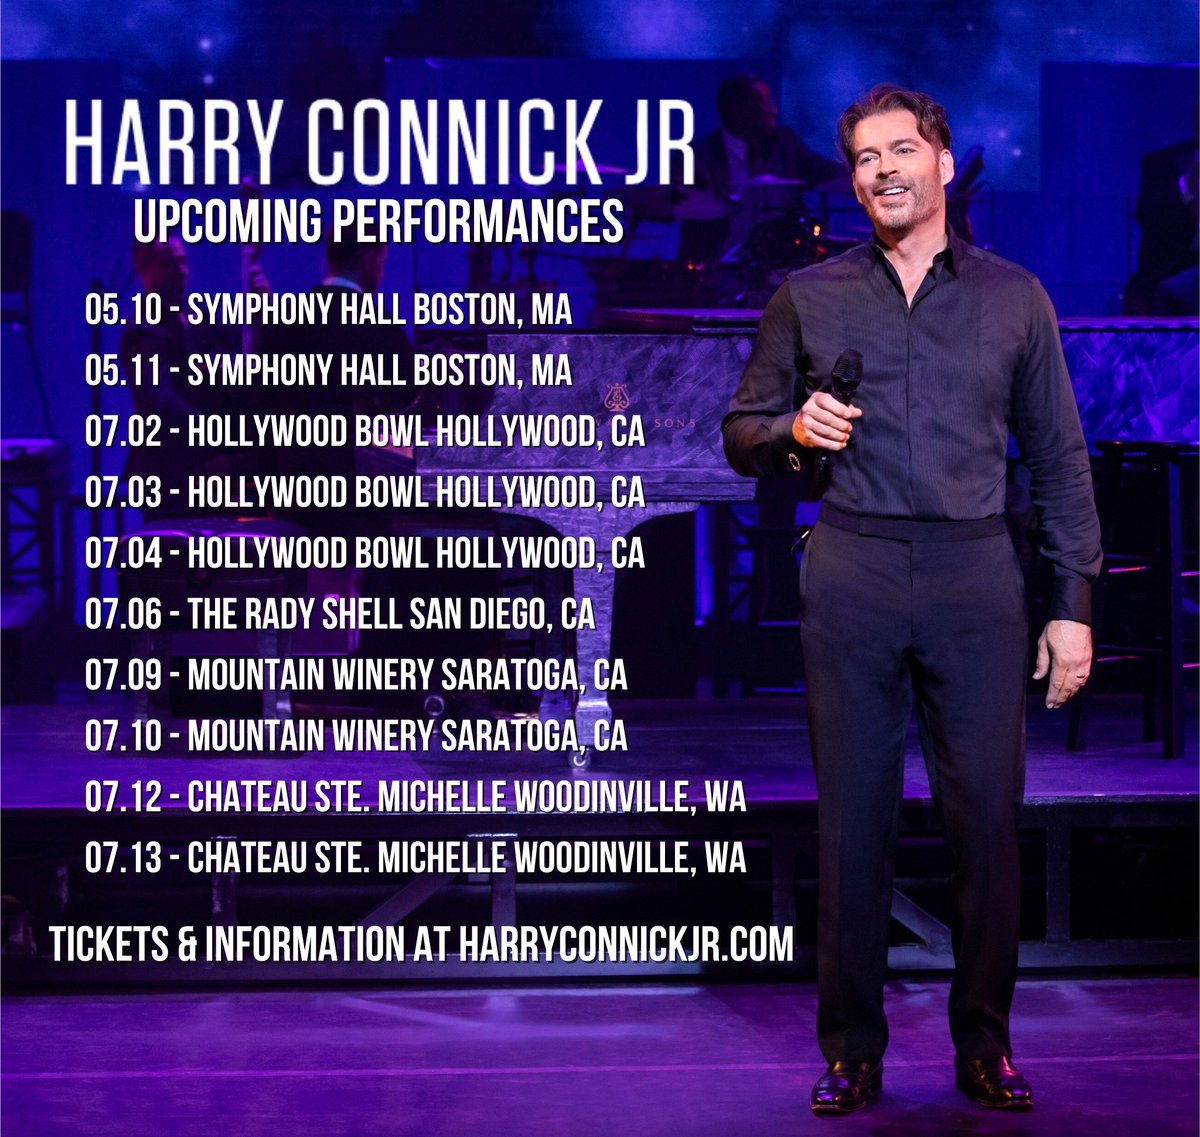 get ready, y'all! i'm hittin' the road! (just for a few shows...) come see me if y'all are in the neighborhood - gonna be fun!!!  get your tickets here: harryconnickjr.com/tour